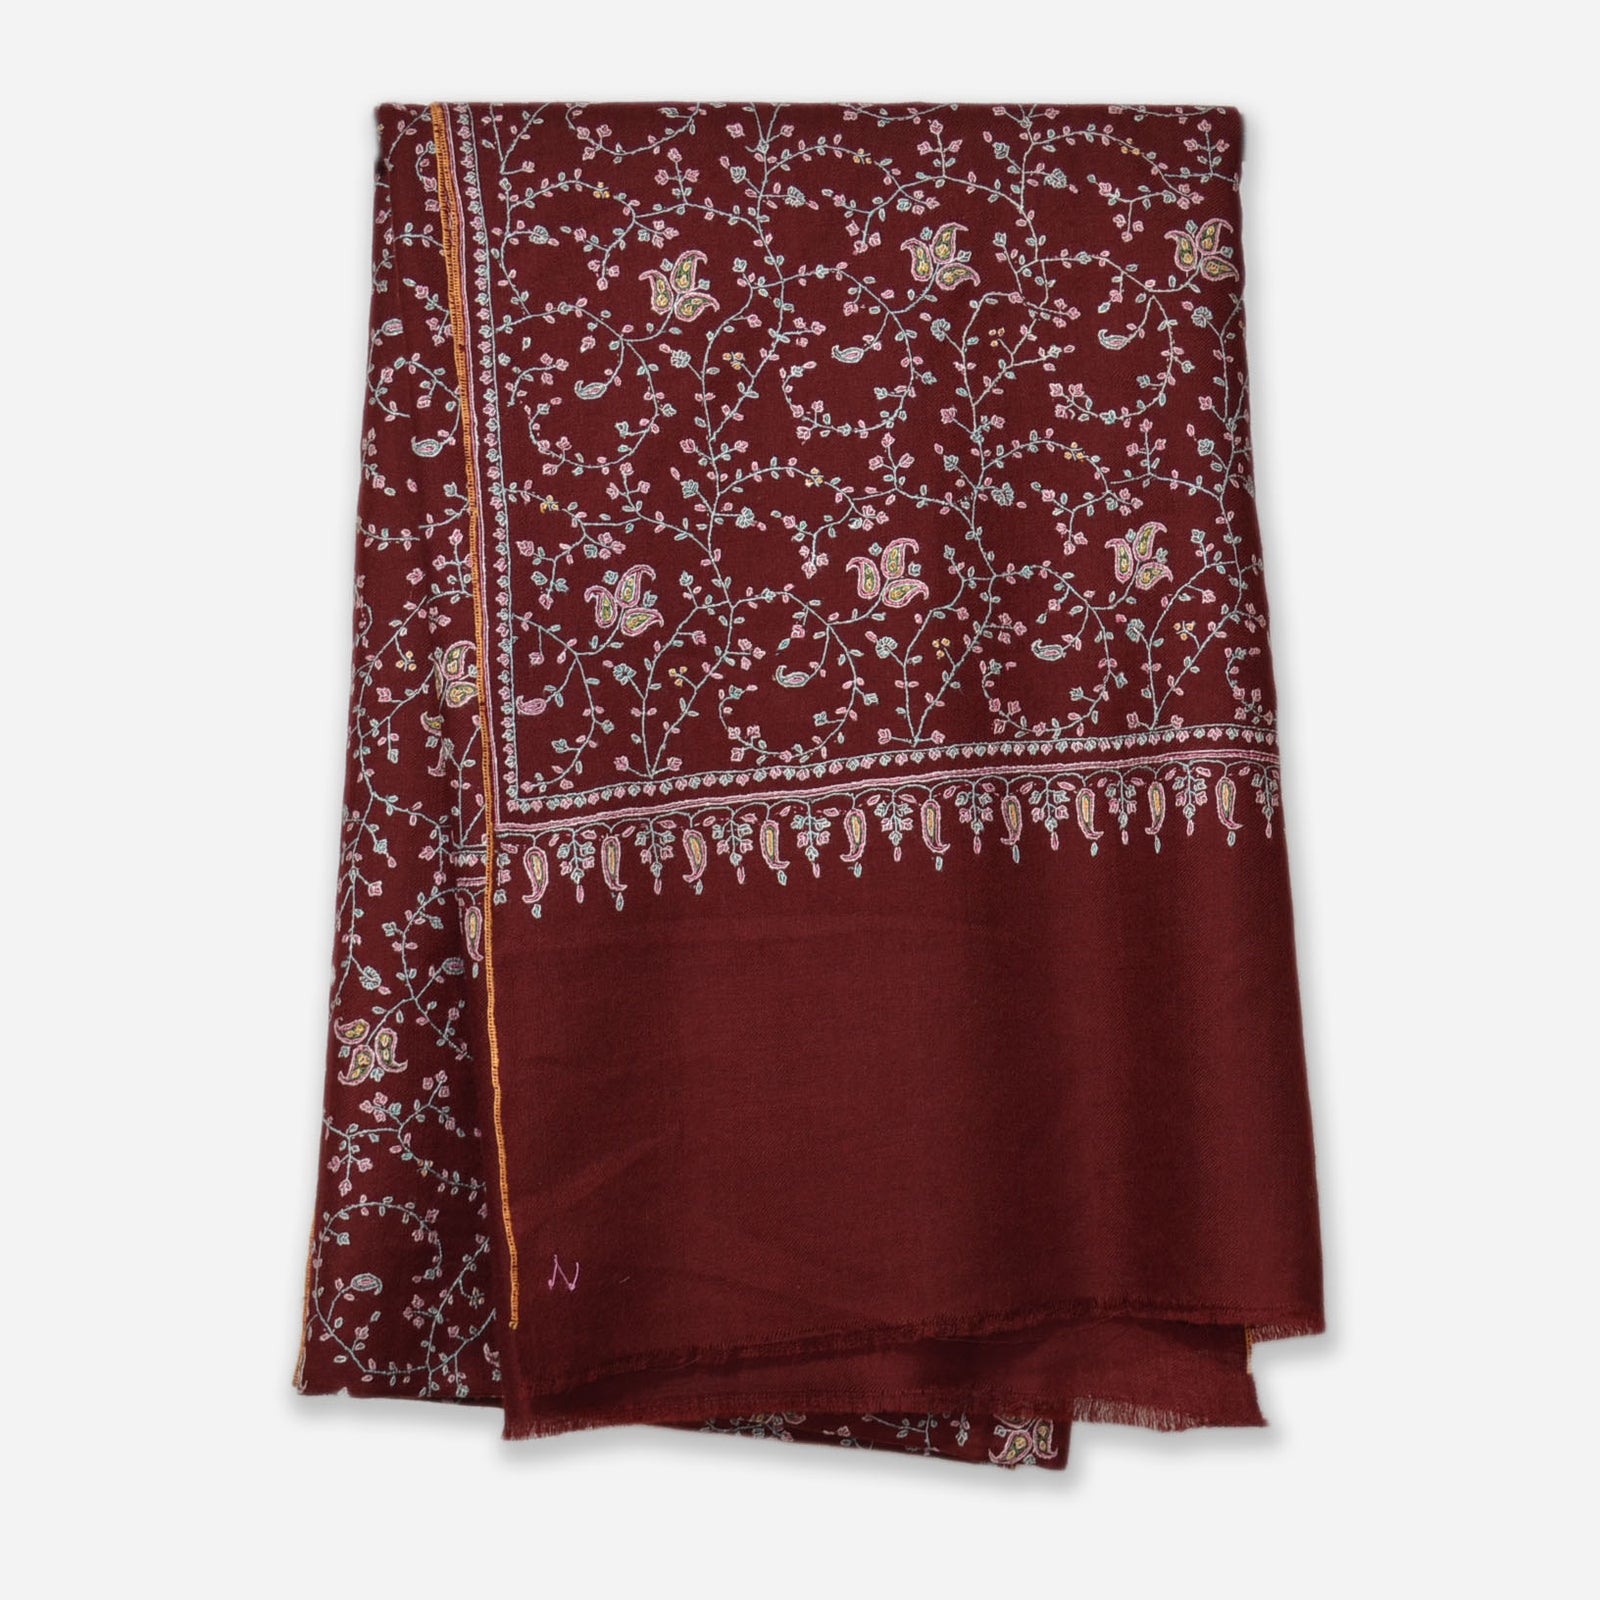 Maroon Jali Embroidery Cashmere Travel Wrap